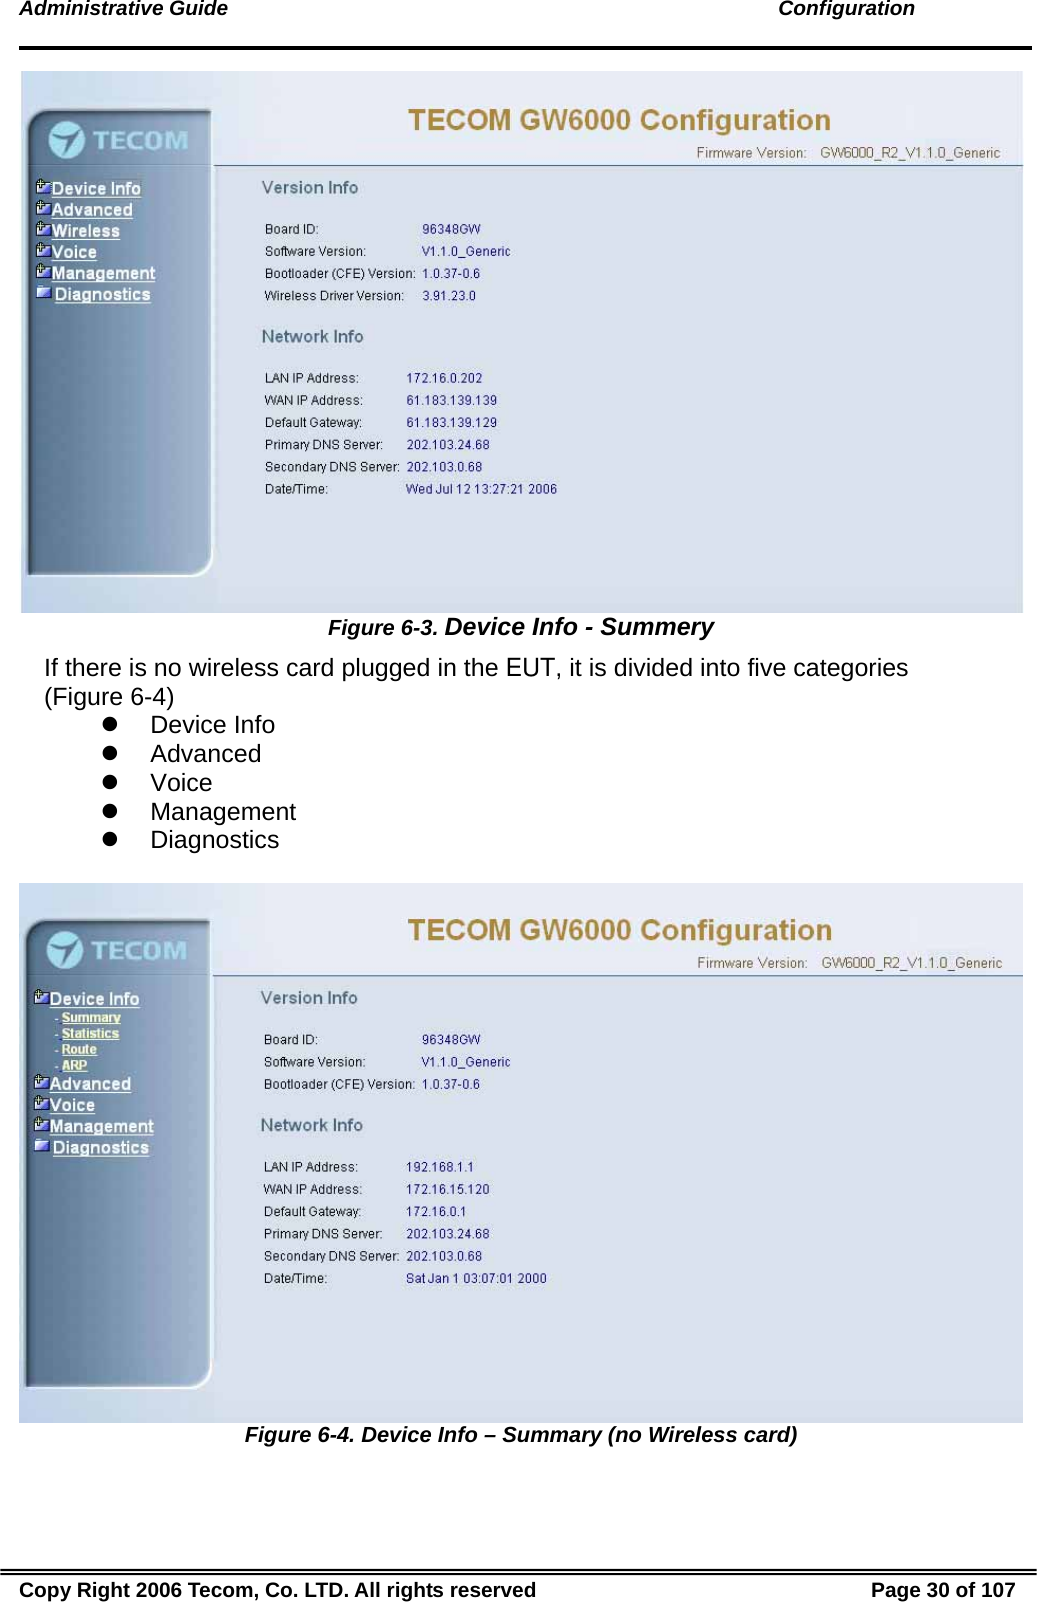 Administrative Guide                                                                                               Configuration  Figure 6-3. Device Info - Summery If there is no wireless card plugged in the EUT, it is divided into five categories (Figure 6-4) z Device Info z Advanced z Voice z Management z Diagnostics   Figure 6-4. Device Info – Summary (no Wireless card) Copy Right 2006 Tecom, Co. LTD. All rights reserved  Page 30 of 107 